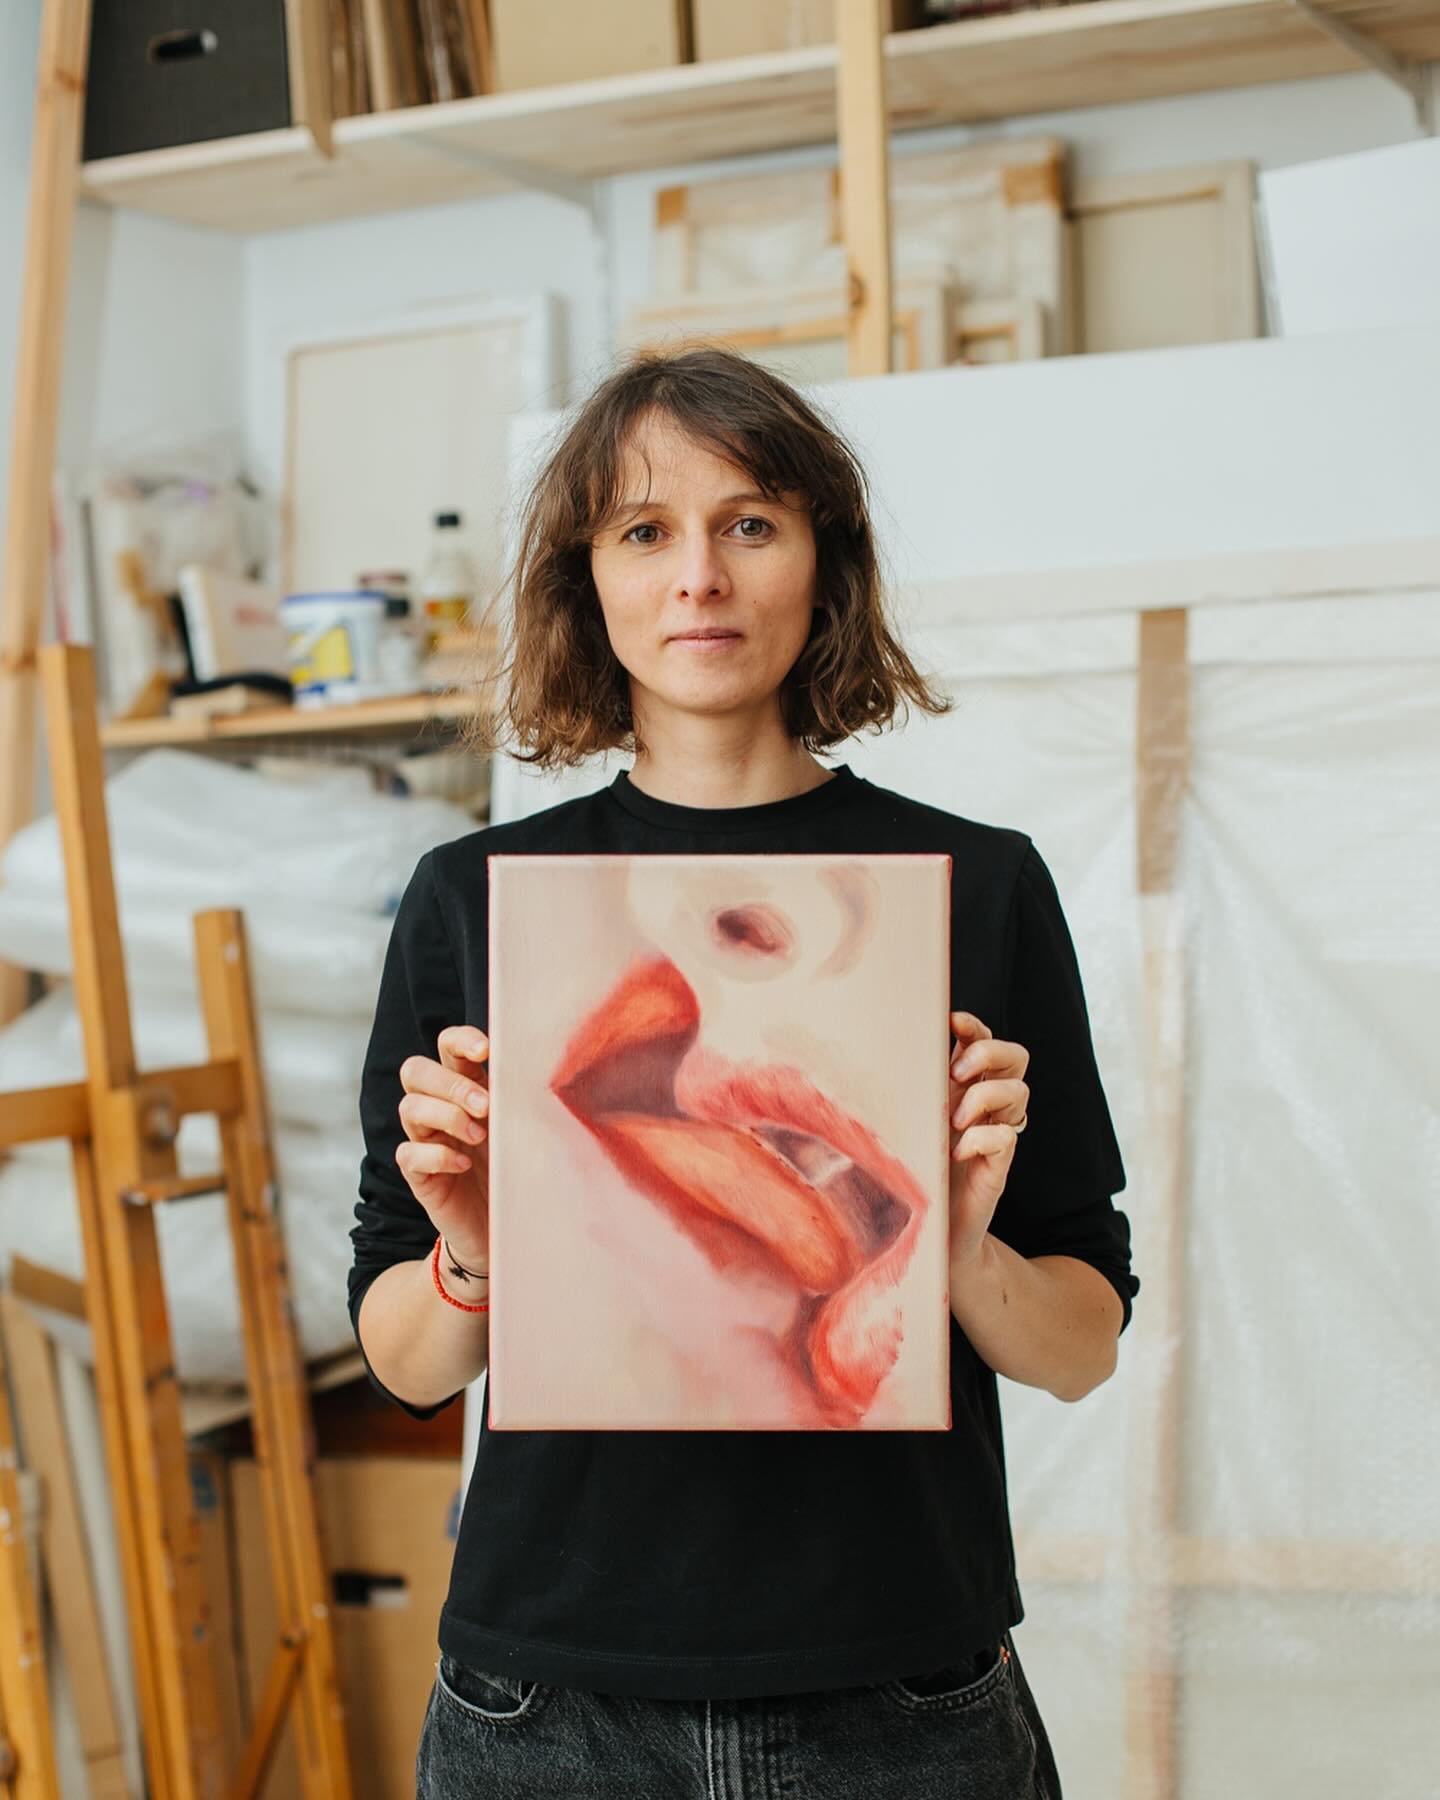 It had been over half a year since @monikachlebek &rsquo;s exhibition at HIDDEN, prompting our decision to visit her studio in Krakow. As we appreciated her latest work, we also engaged in conversations about her current project and fondly reflected 